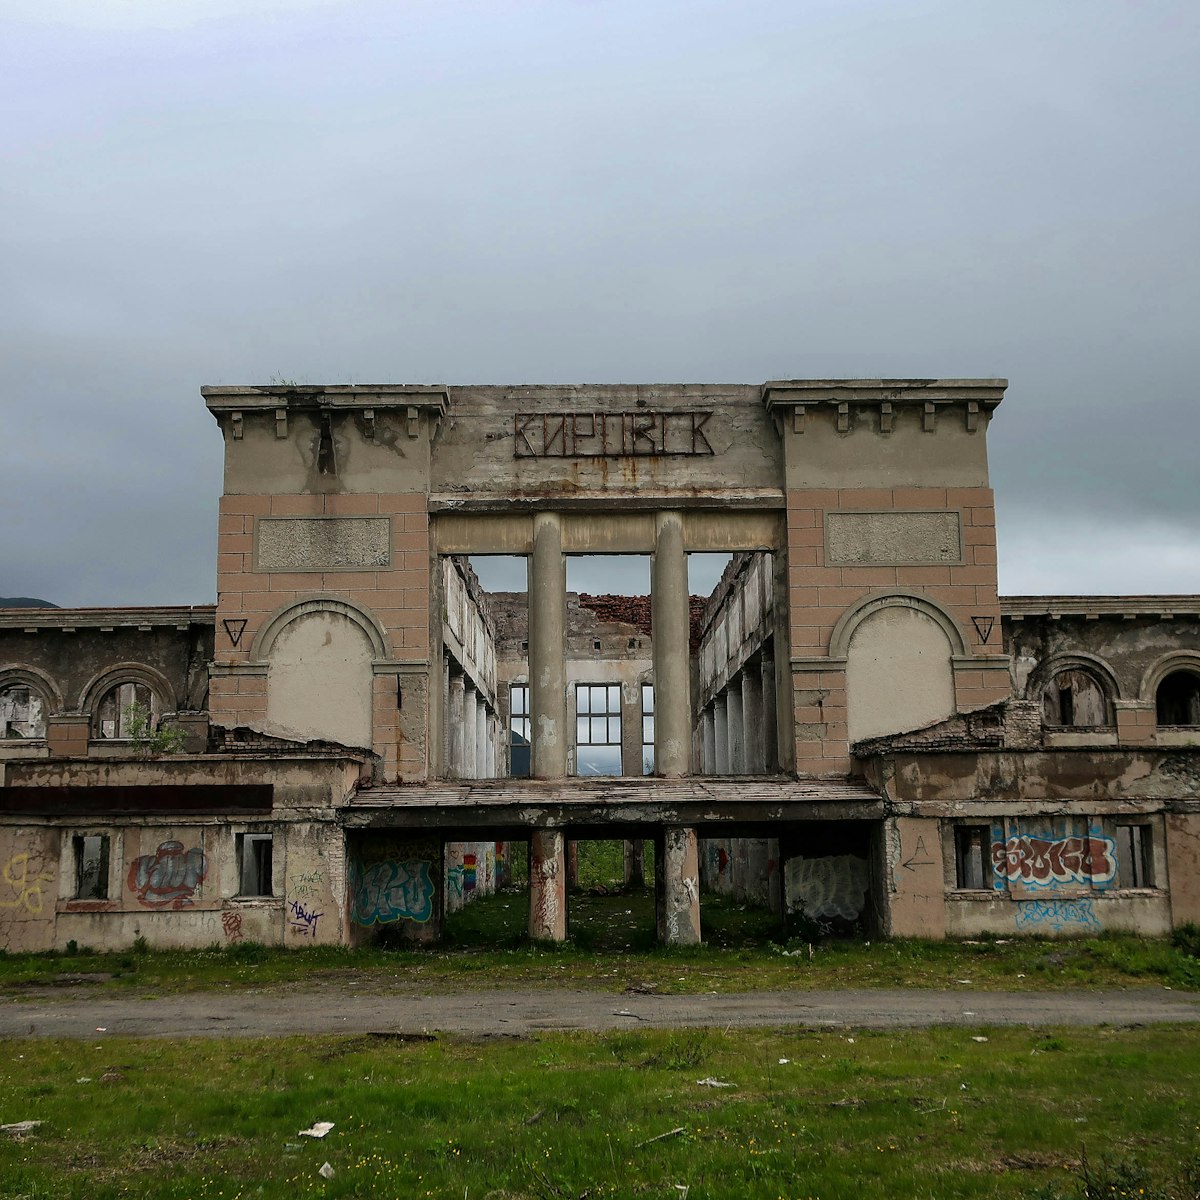 Ruins of abandoned railway station in Kirovsk, Russia.